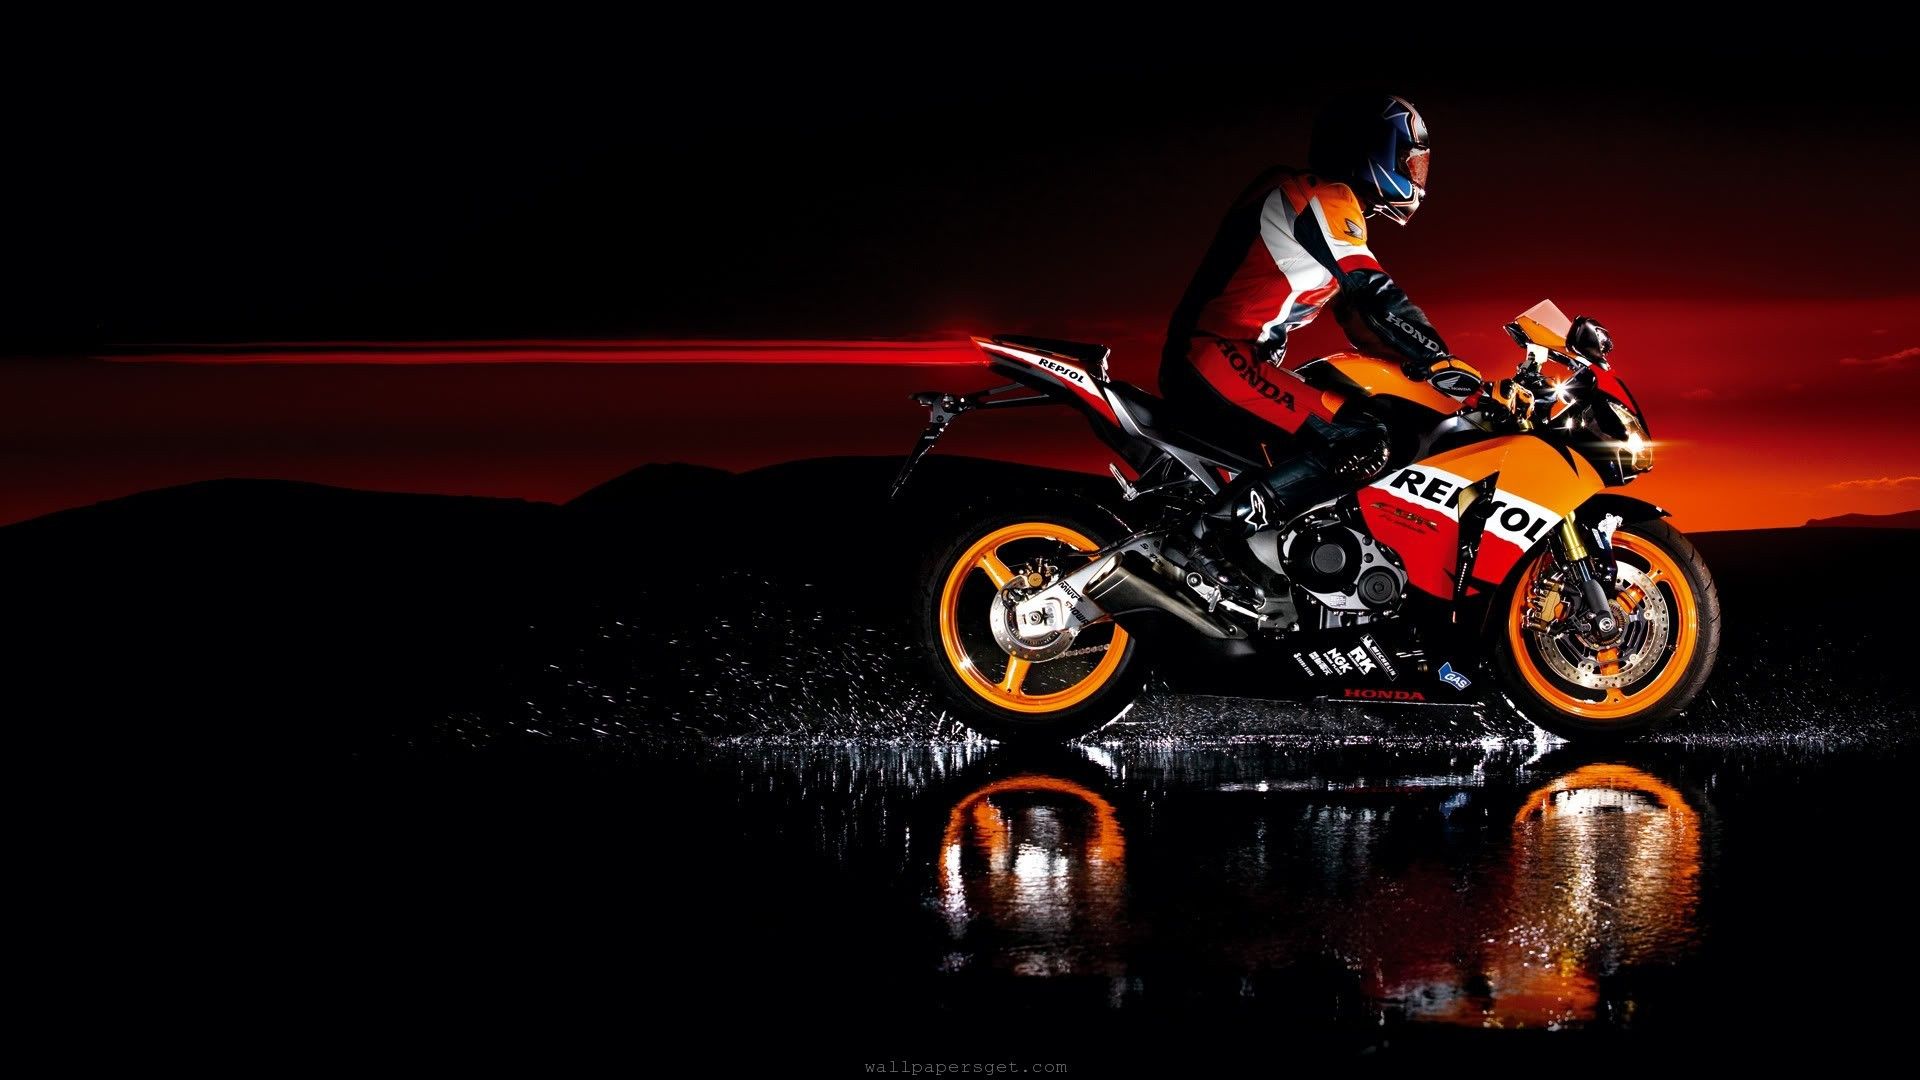 hd bikes wallpapers for android,motorcycle,motorcycling,motorcycle racer,vehicle,motocross